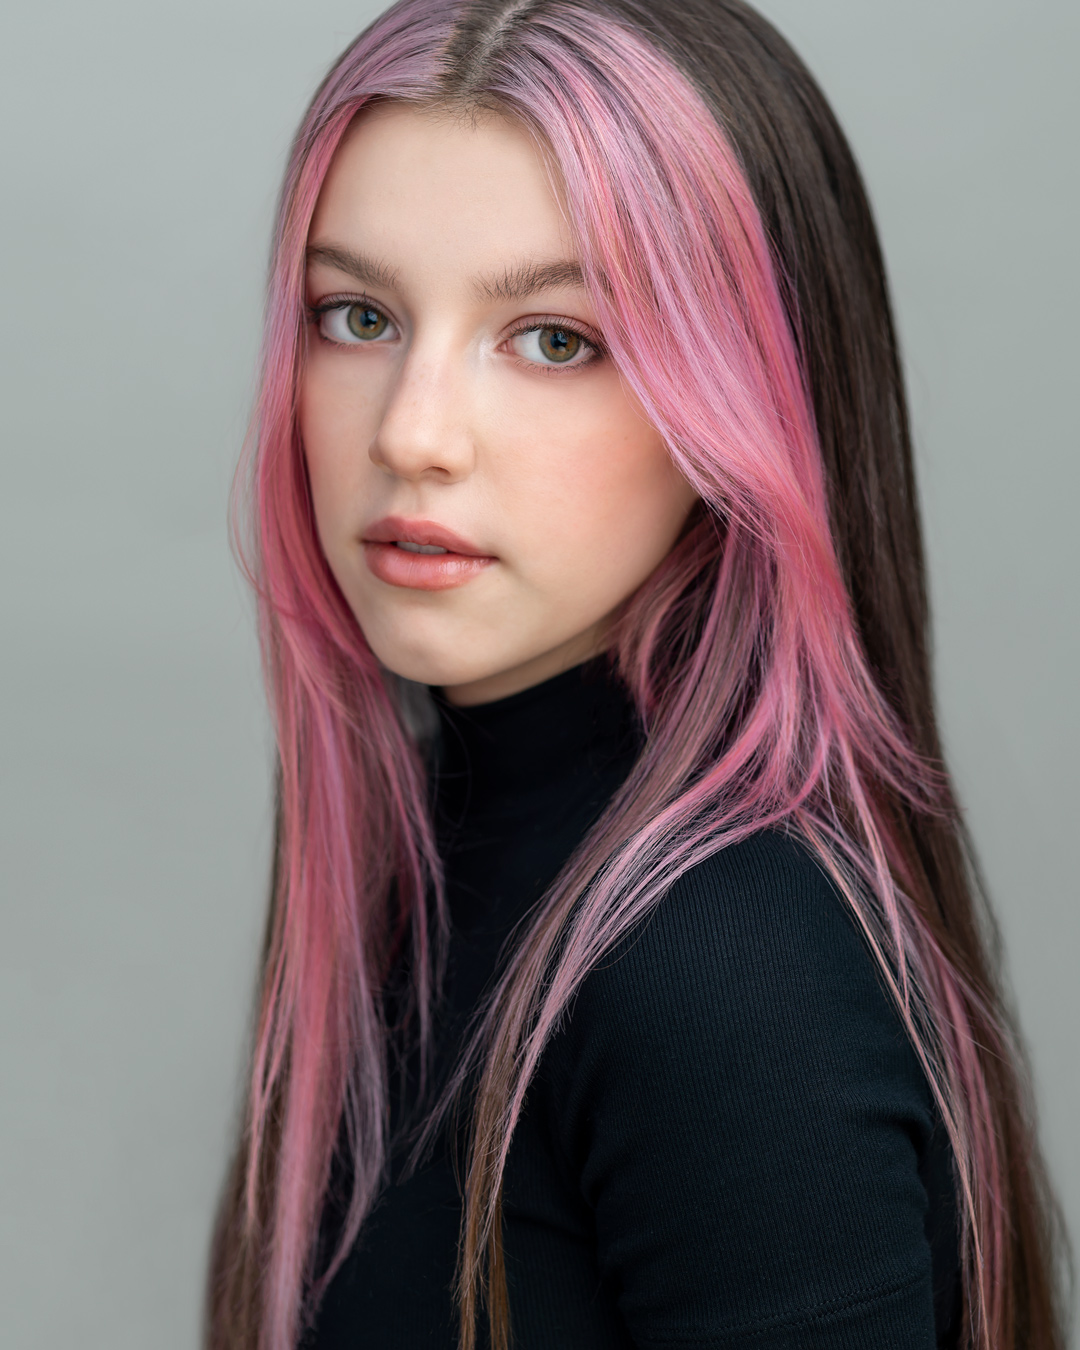 Headshot of Tennessee teen actress and singer songwriter Ava Grace